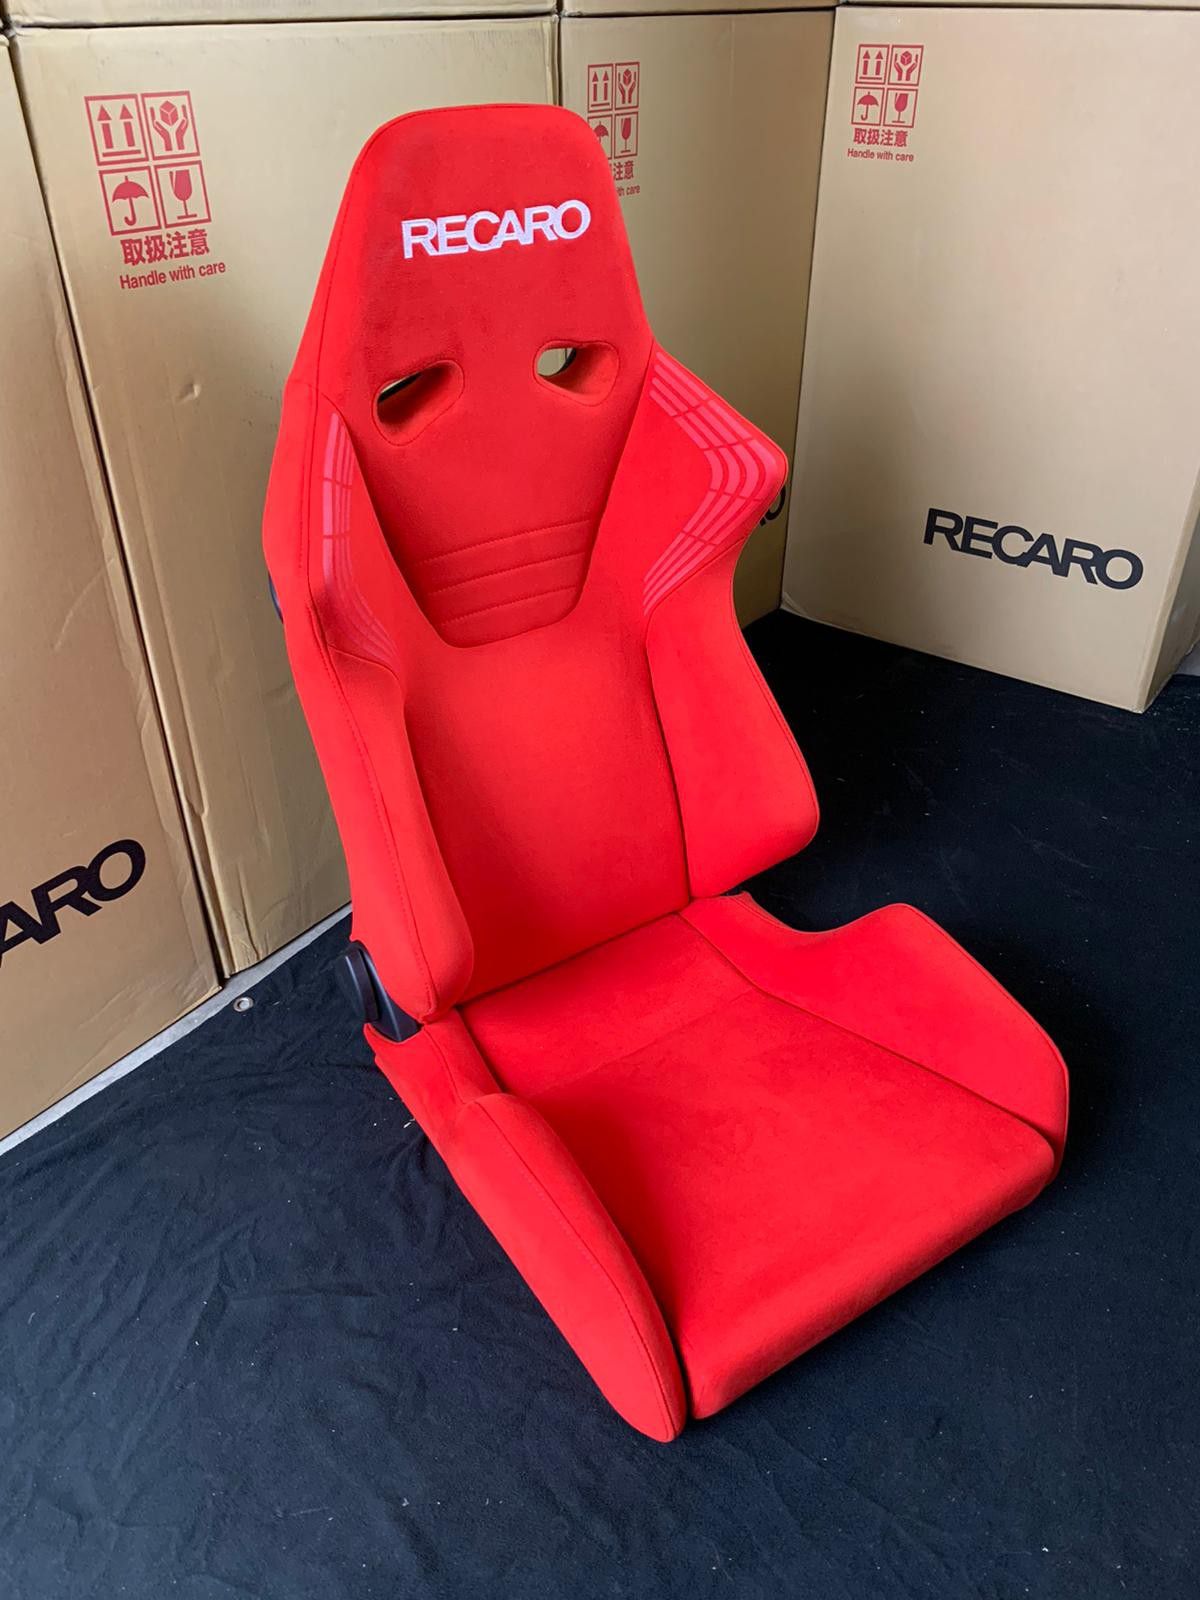 Recaro Sr6 Reclineable Japan Seat And Rs Gs For Sale In La Puente Ca Offerup